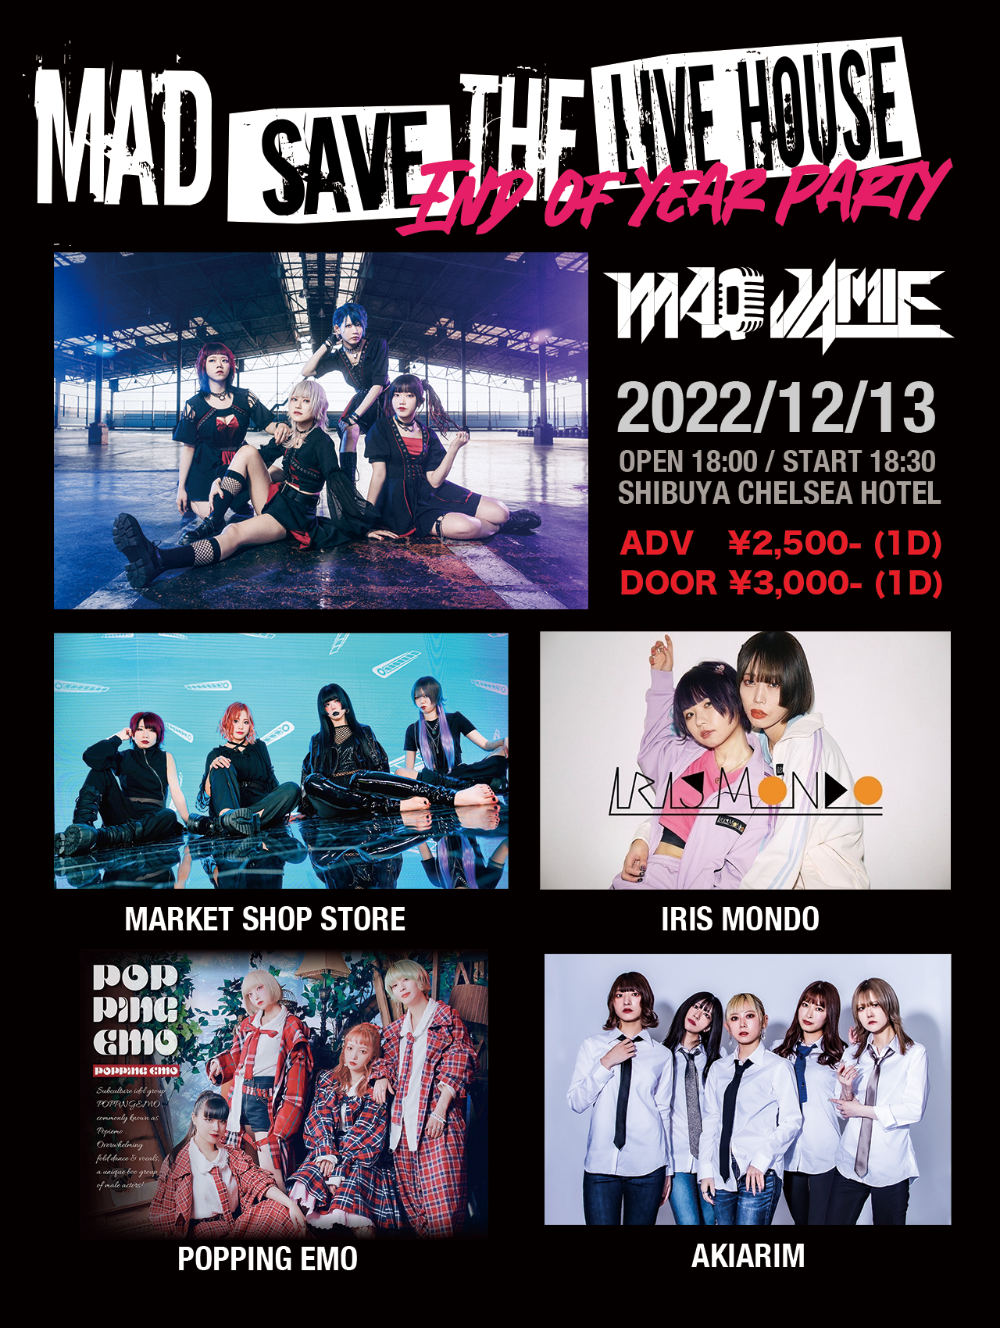 「MAD SAVE THE LIVE HOUSE」 “END OF YEAR PARTY”